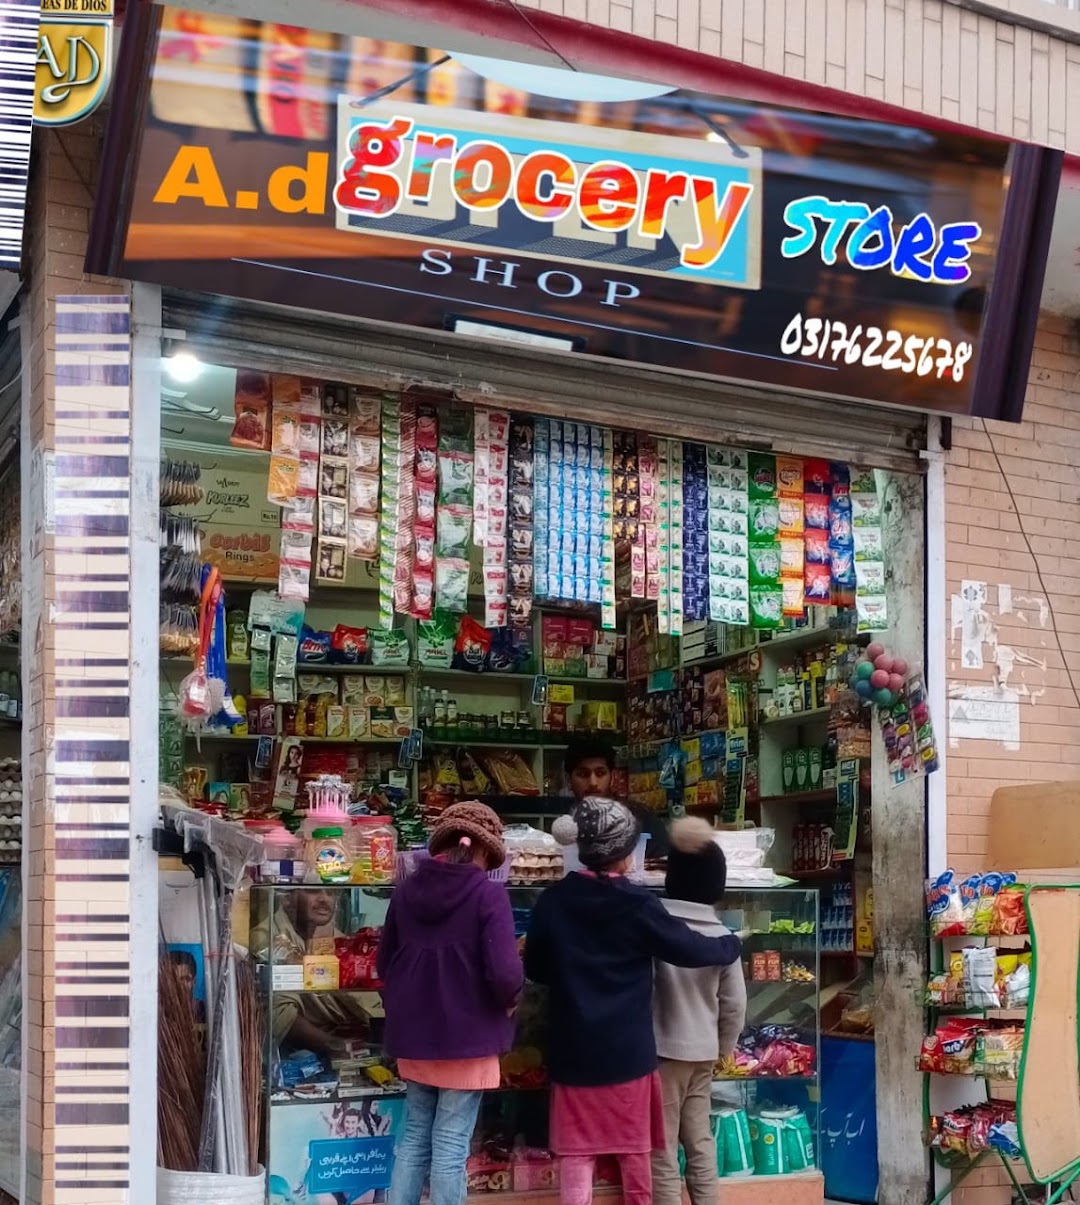 A.D grocery store